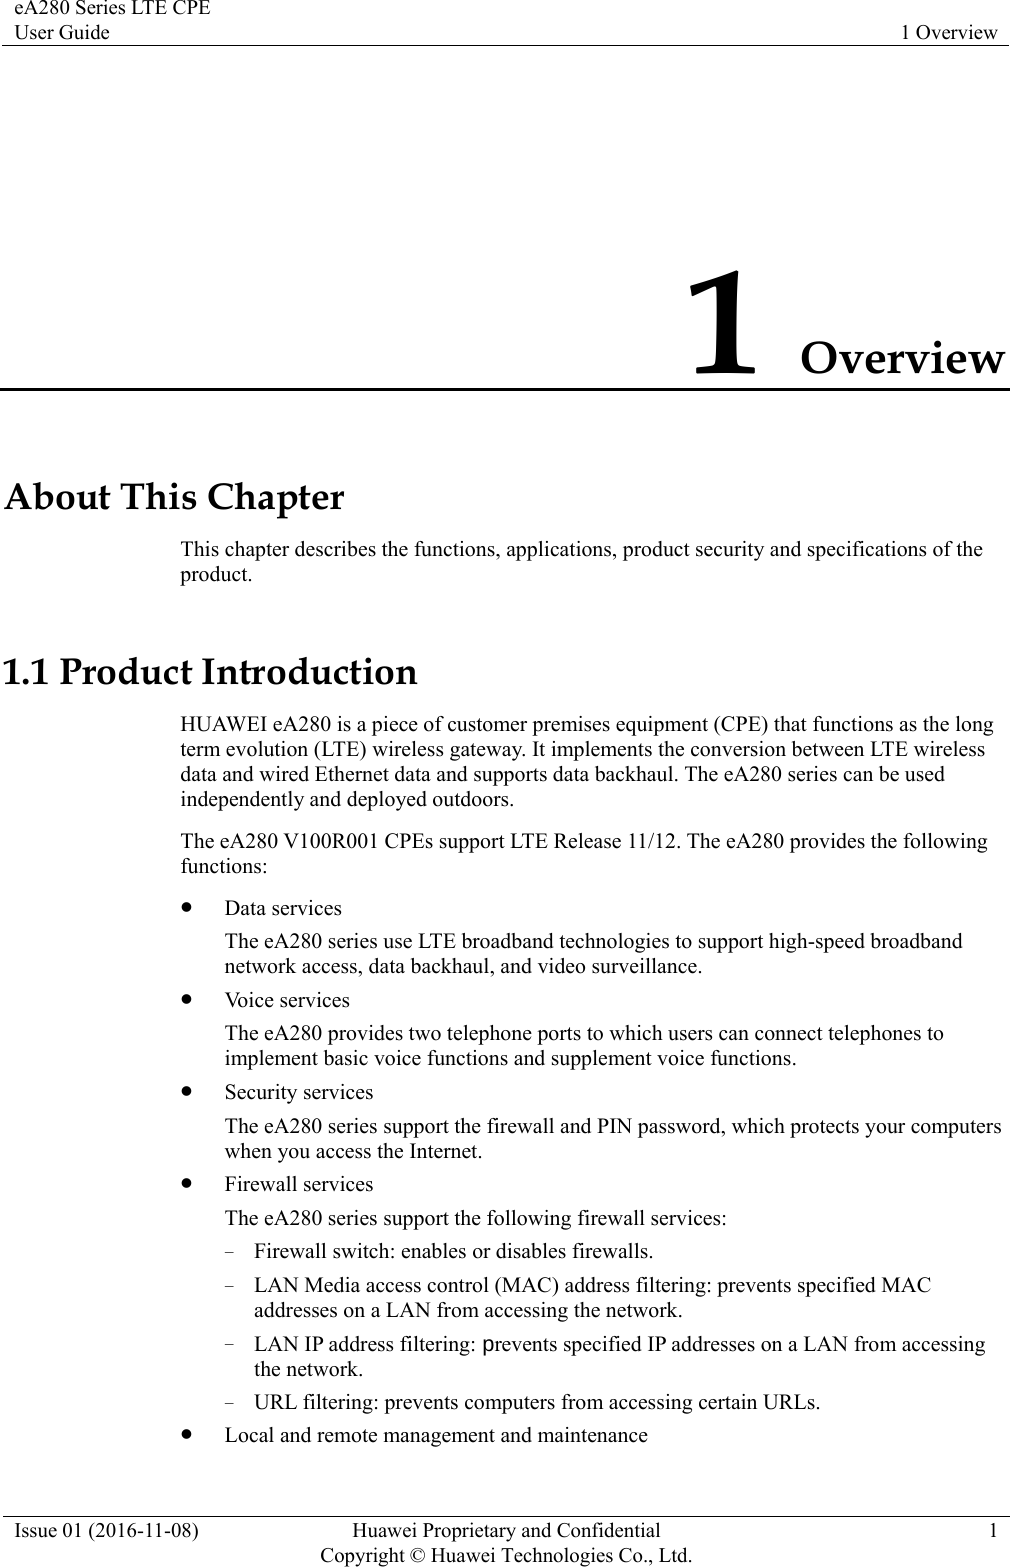 eA280 Series LTE CPE User Guide  1 Overview Issue 01 (2016-11-08)  Huawei Proprietary and Confidential         Copyright © Huawei Technologies Co., Ltd.1 1 Overview About This Chapter This chapter describes the functions, applications, product security and specifications of the product. 1.1 Product Introduction HUAWEI eA280 is a piece of customer premises equipment (CPE) that functions as the long term evolution (LTE) wireless gateway. It implements the conversion between LTE wireless data and wired Ethernet data and supports data backhaul. The eA280 series can be used independently and deployed outdoors.   The eA280 V100R001 CPEs support LTE Release 11/12. The eA280 provides the following functions:  Data services The eA280 series use LTE broadband technologies to support high-speed broadband network access, data backhaul, and video surveillance.  Voice services The eA280 provides two telephone ports to which users can connect telephones to implement basic voice functions and supplement voice functions.  Security services The eA280 series support the firewall and PIN password, which protects your computers when you access the Internet.  Firewall services The eA280 series support the following firewall services: − Firewall switch: enables or disables firewalls. − LAN Media access control (MAC) address filtering: prevents specified MAC addresses on a LAN from accessing the network. − LAN IP address filtering: prevents specified IP addresses on a LAN from accessing the network. − URL filtering: prevents computers from accessing certain URLs.  Local and remote management and maintenance 